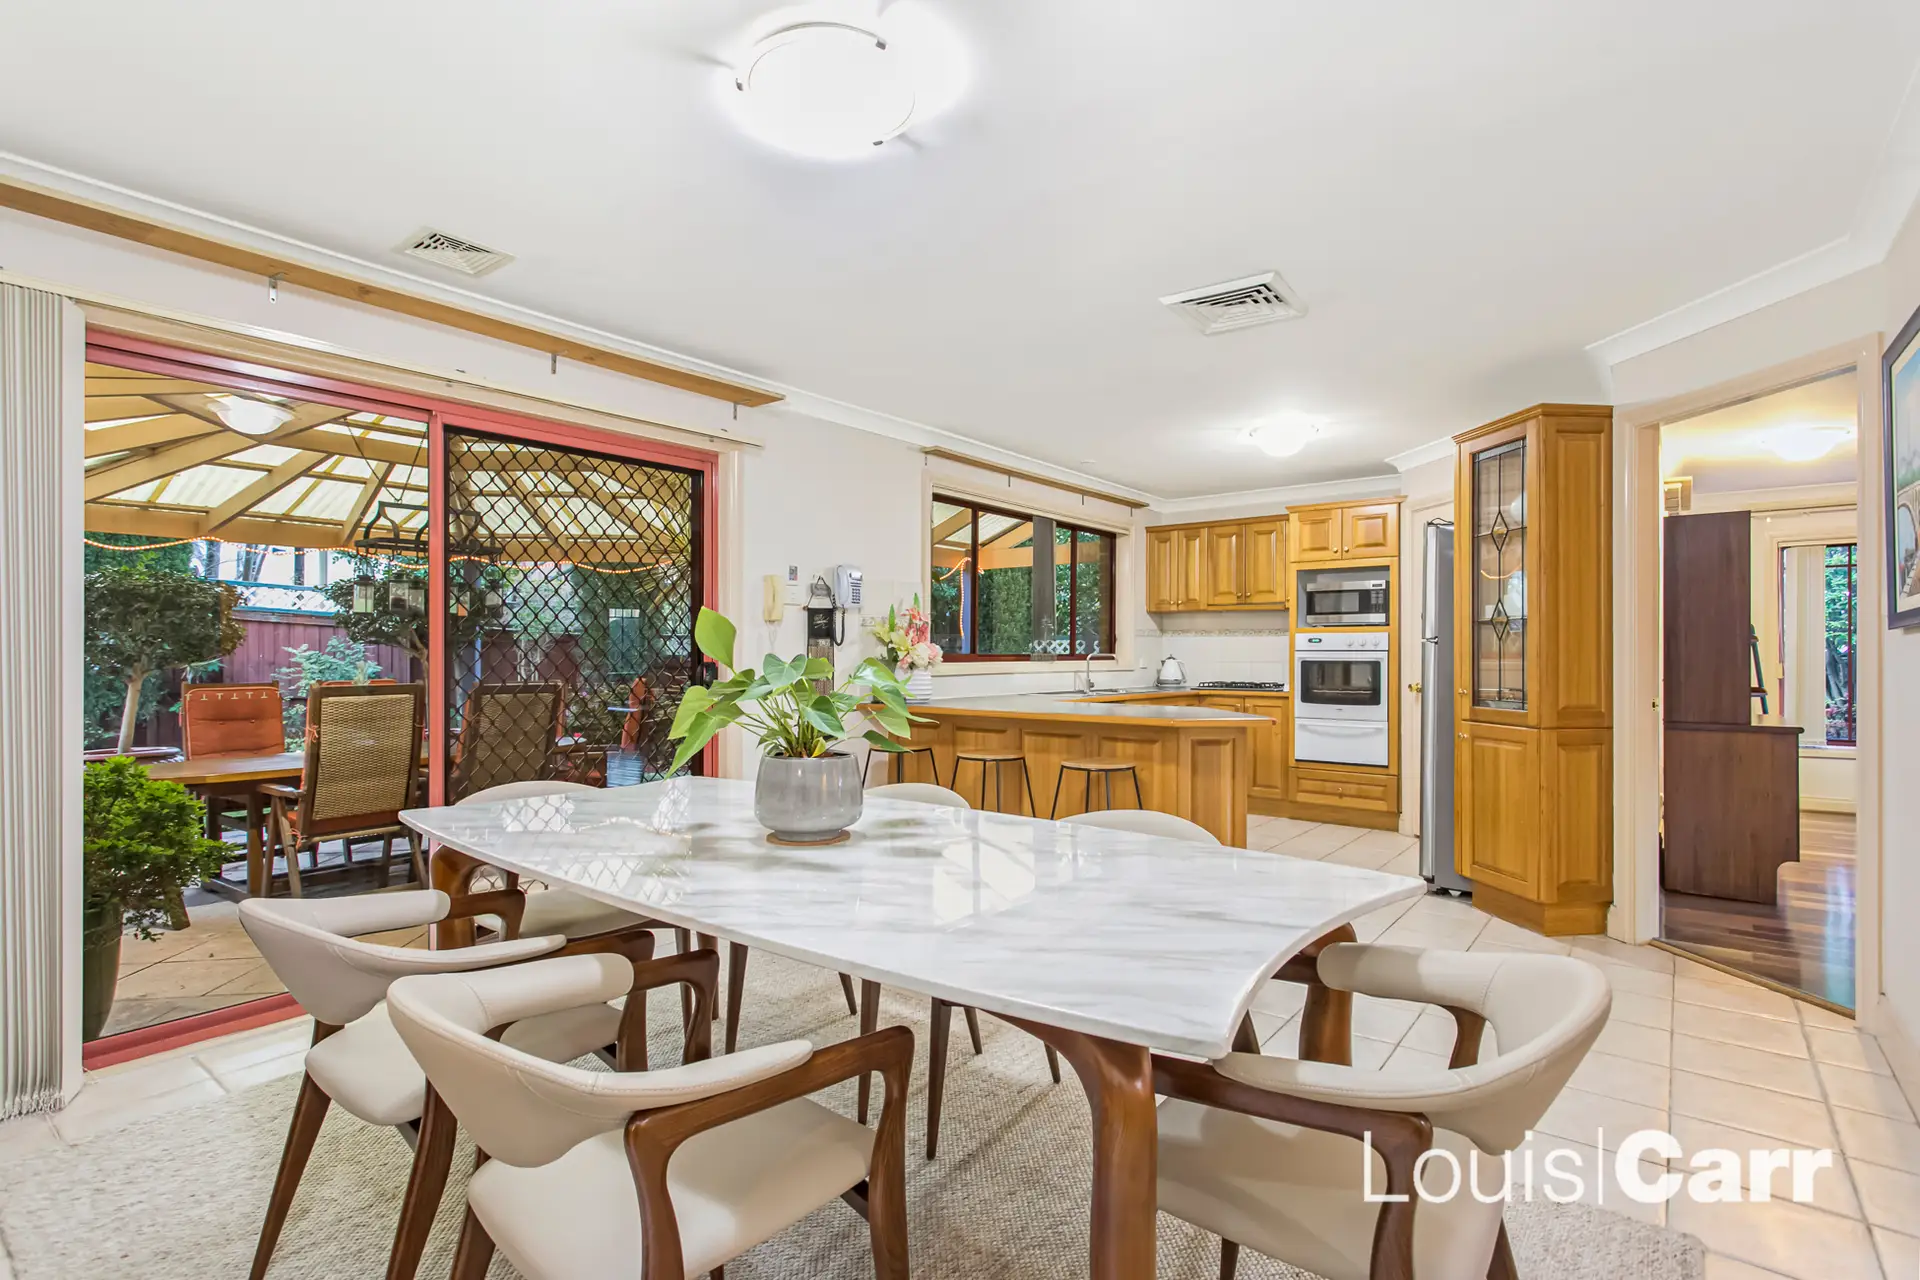 12 John Radley Avenue, Dural Leased by Louis Carr Real Estate - image 6